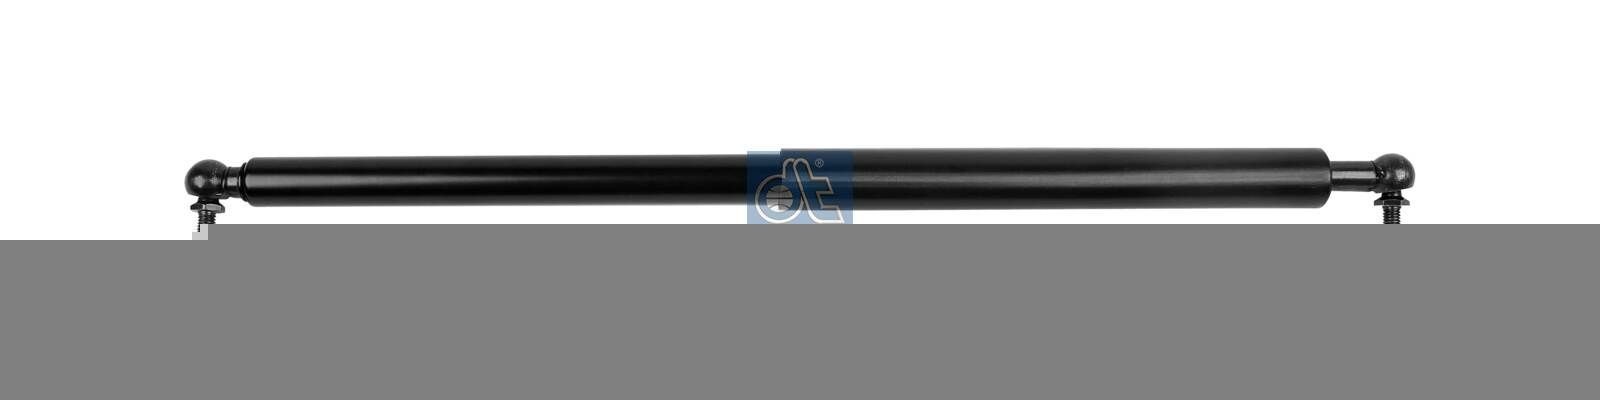 95396 DT Spare Parts 700N, 500 mm Gas Spring 3.80768 buy